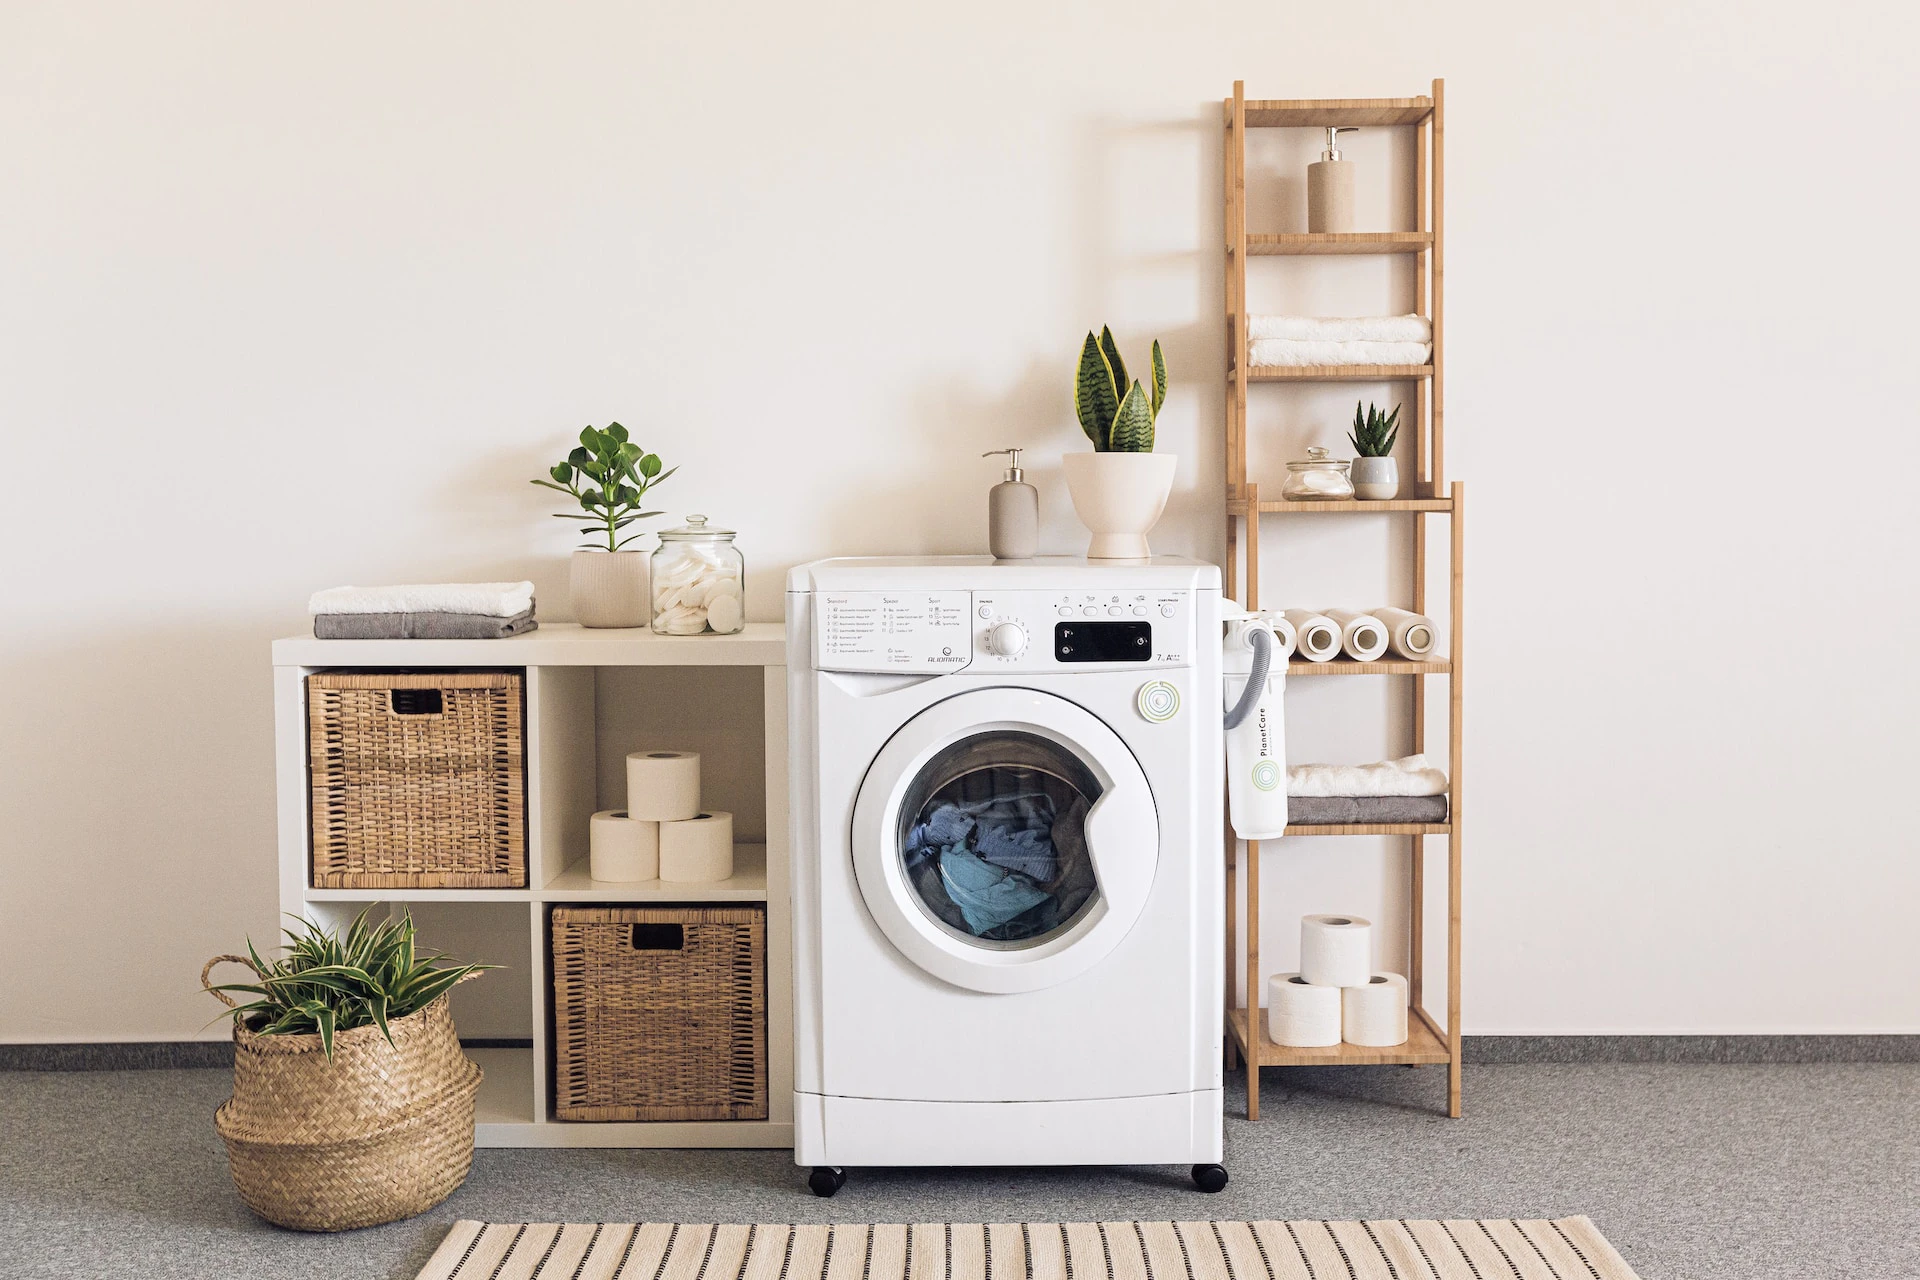 Washing machine in between wooden shelves and baskets